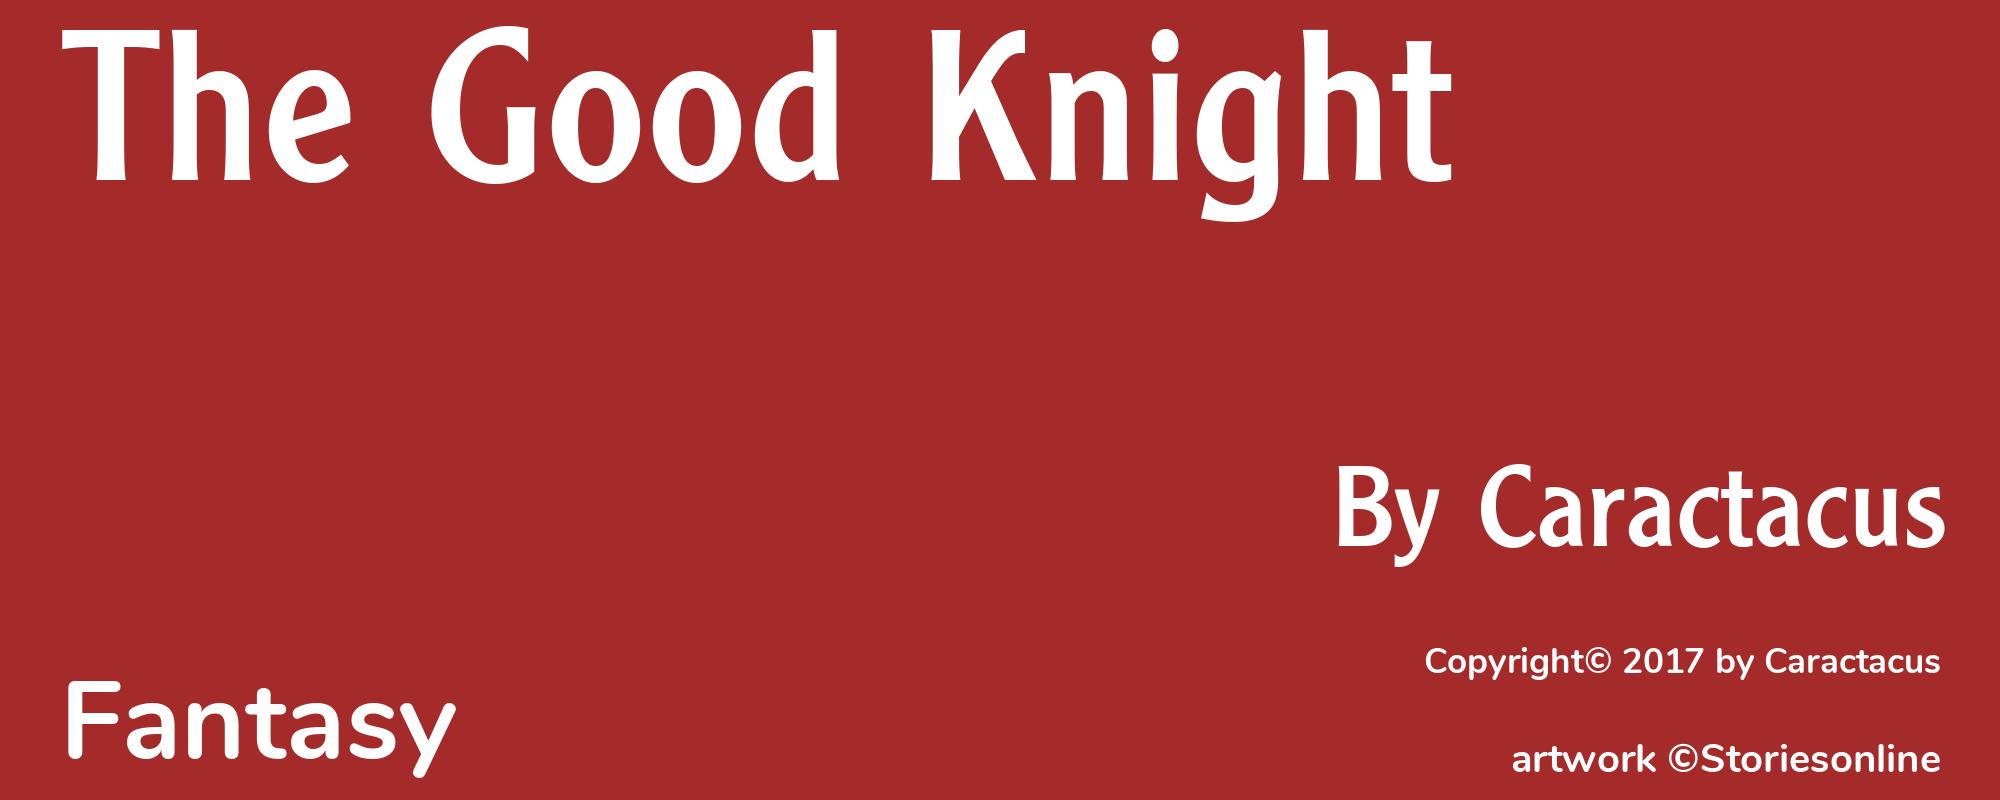 The Good Knight - Cover